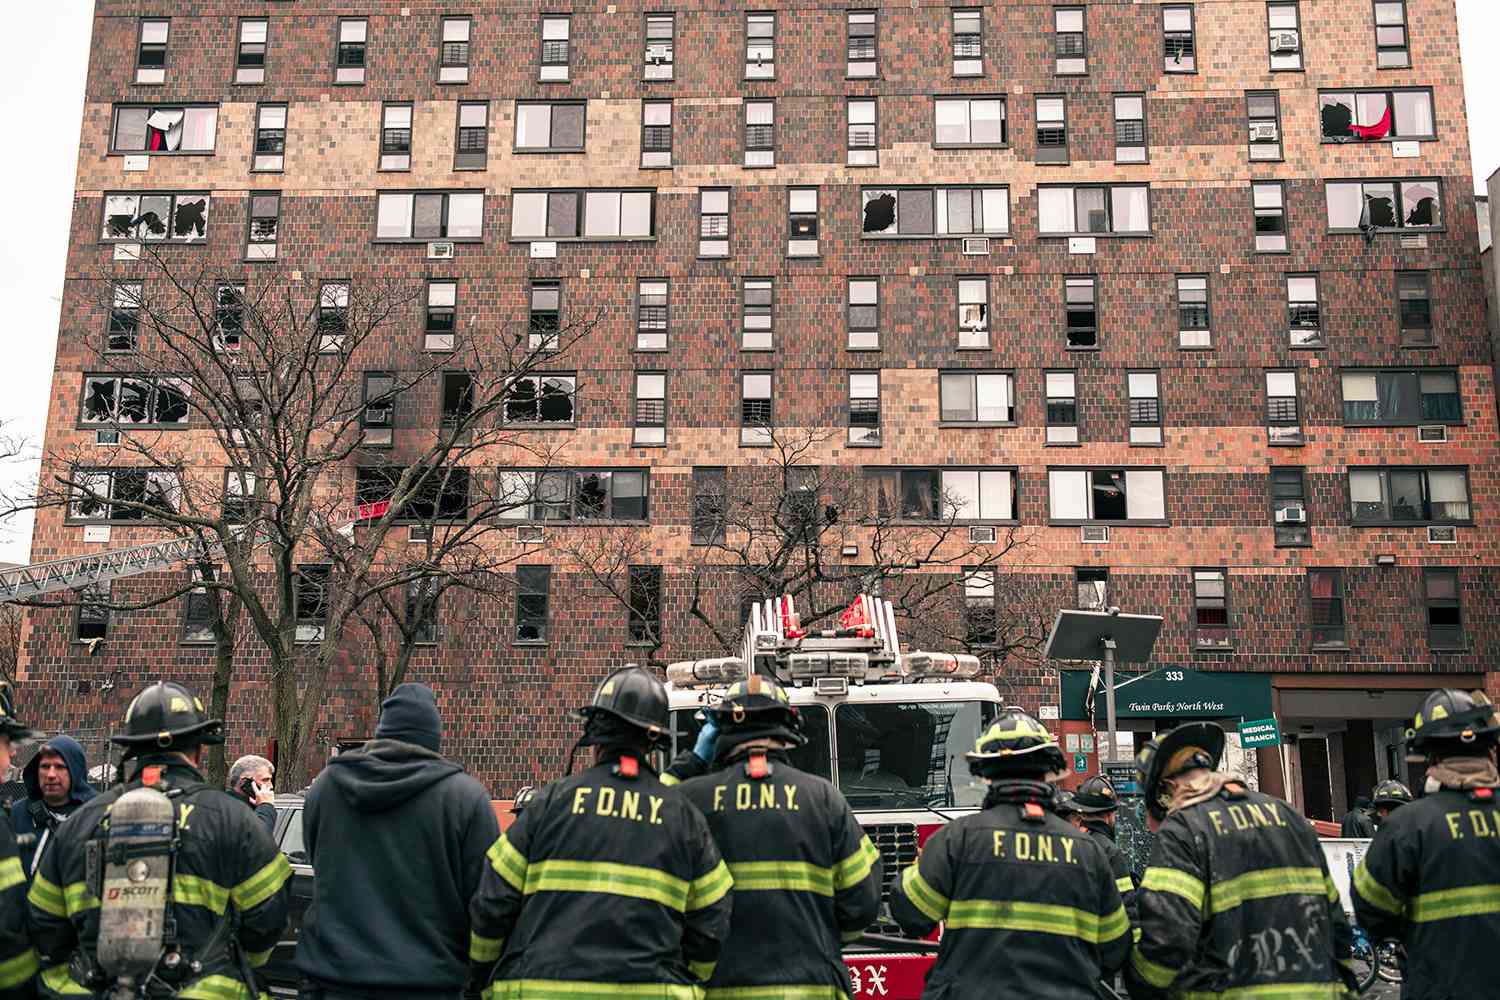 Emergency first responders remain at the scene after an intense fire at a 19-story residential building that erupted in the morning on January 9, 2022 in the Bronx borough of New York City. Reports indicate over 50 people were injured.